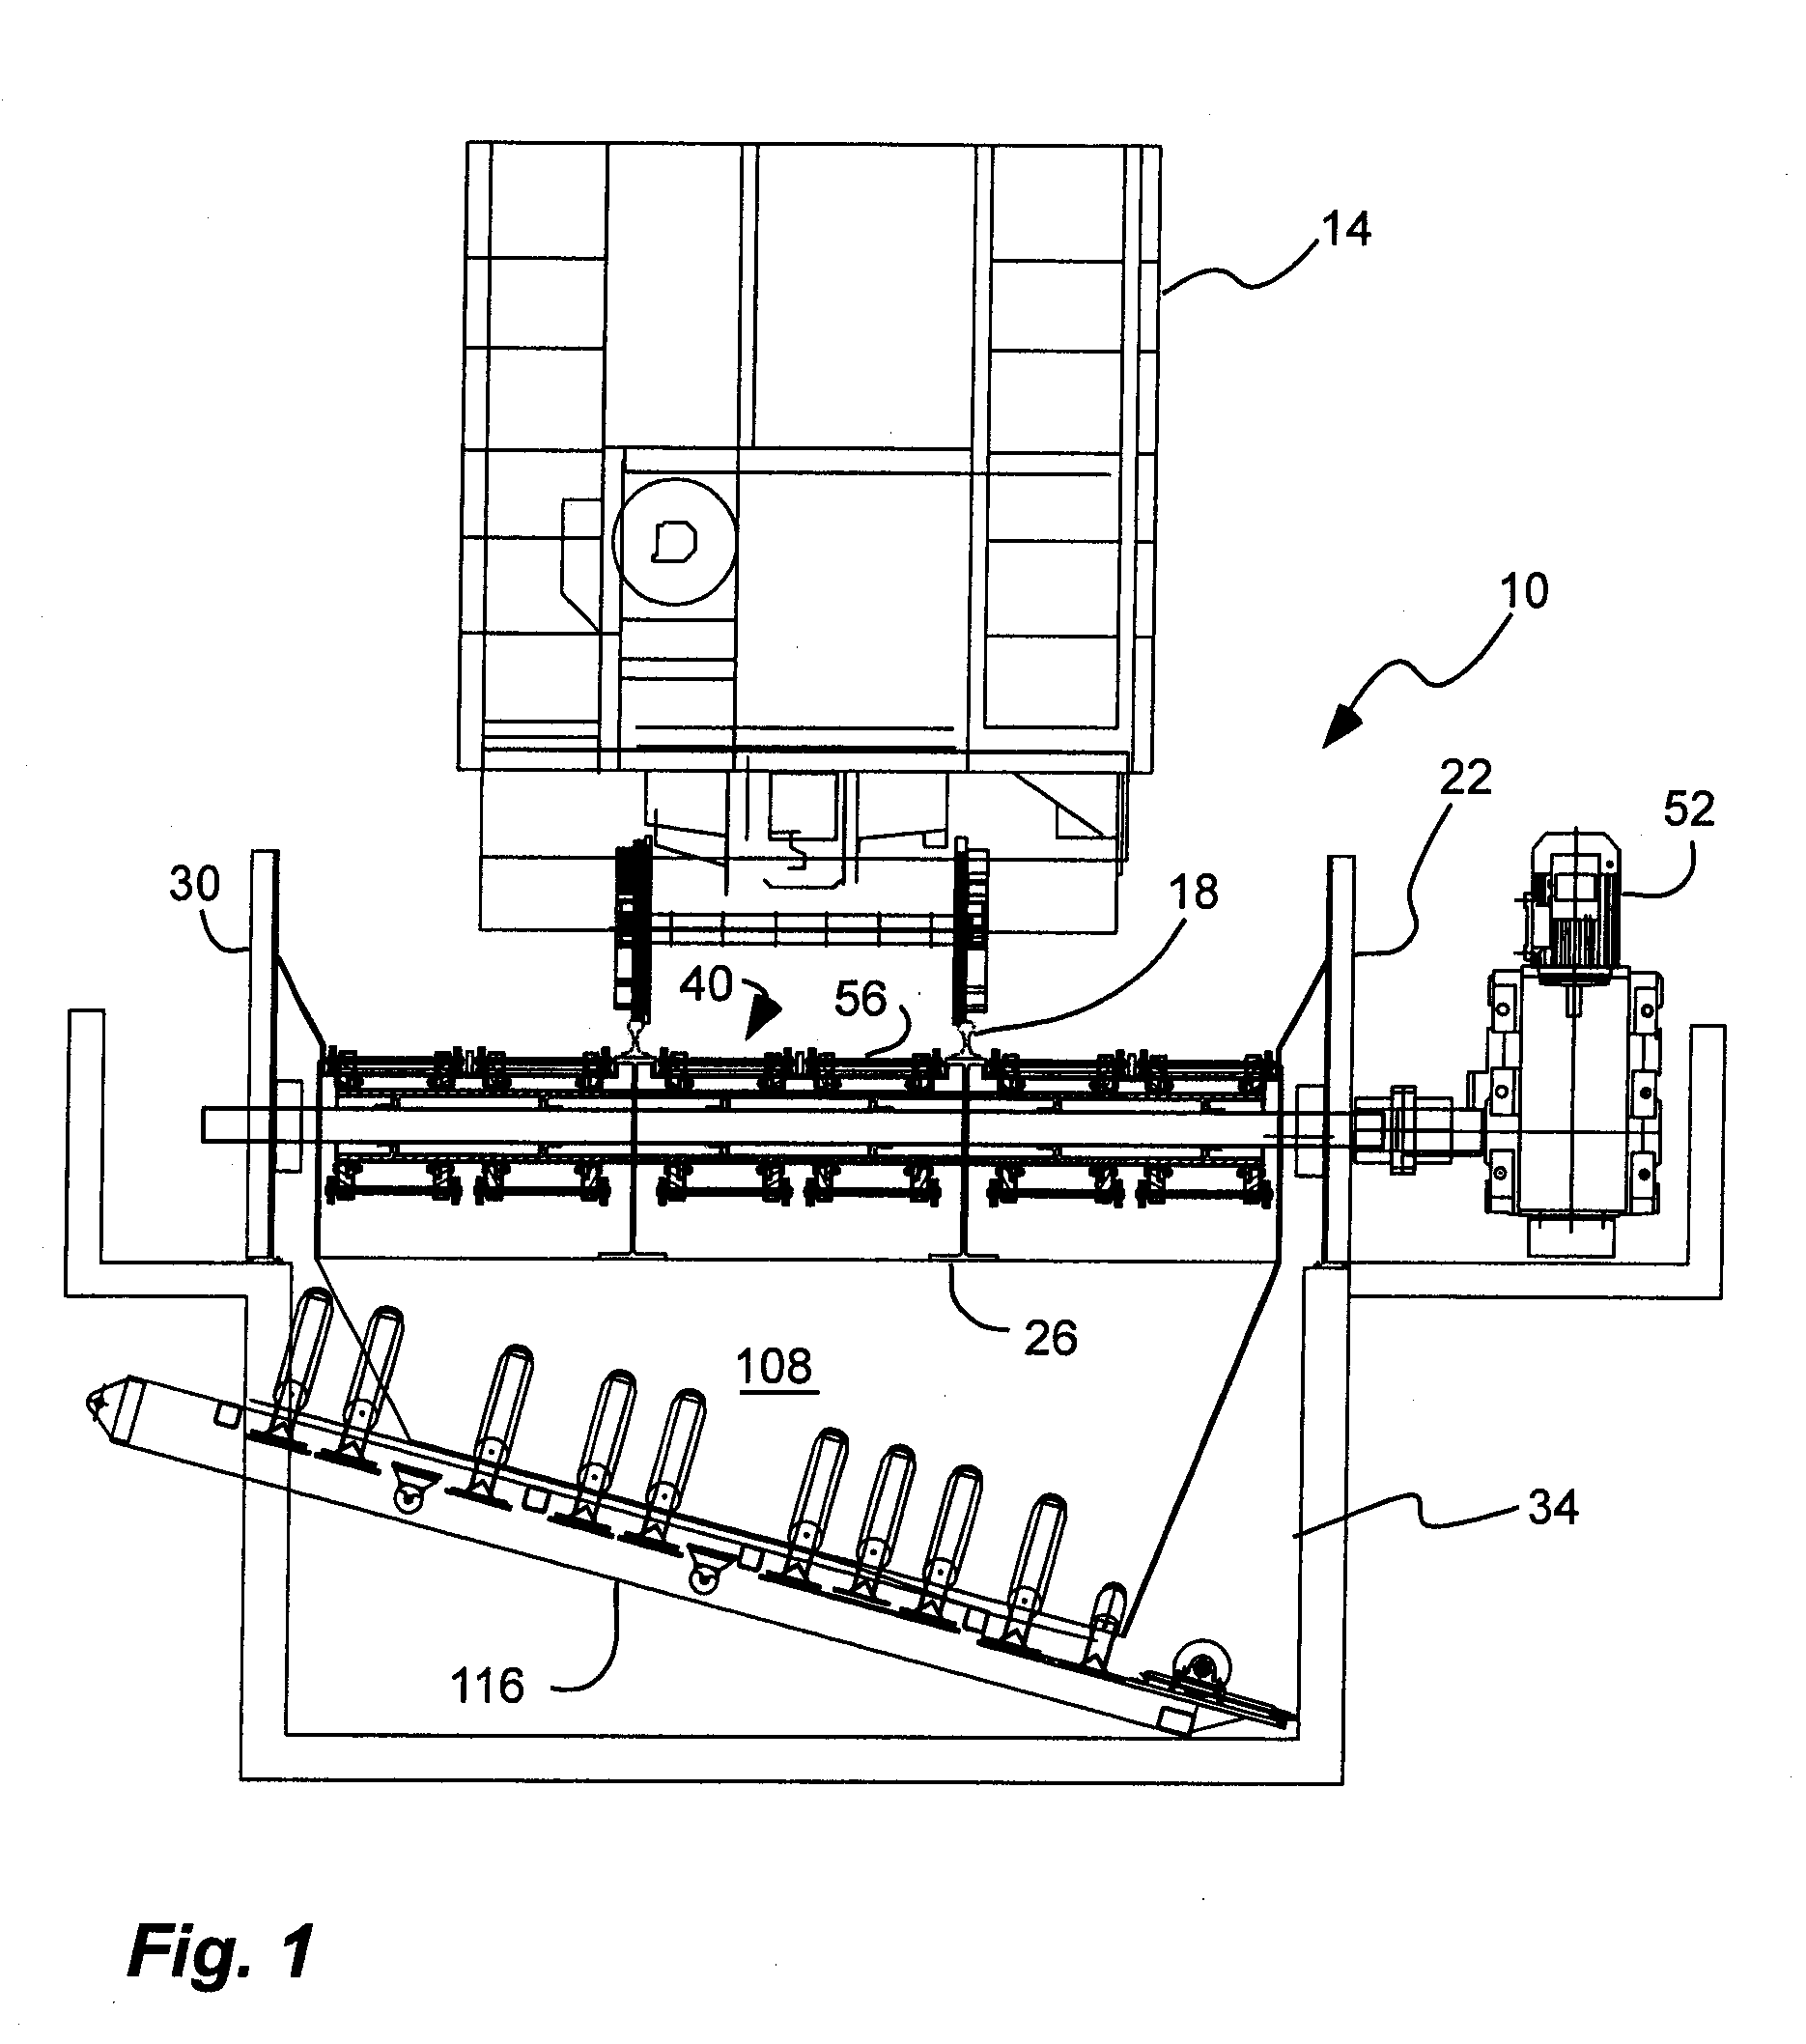 Unloading system and method for continuously moving rapid discharge railcars